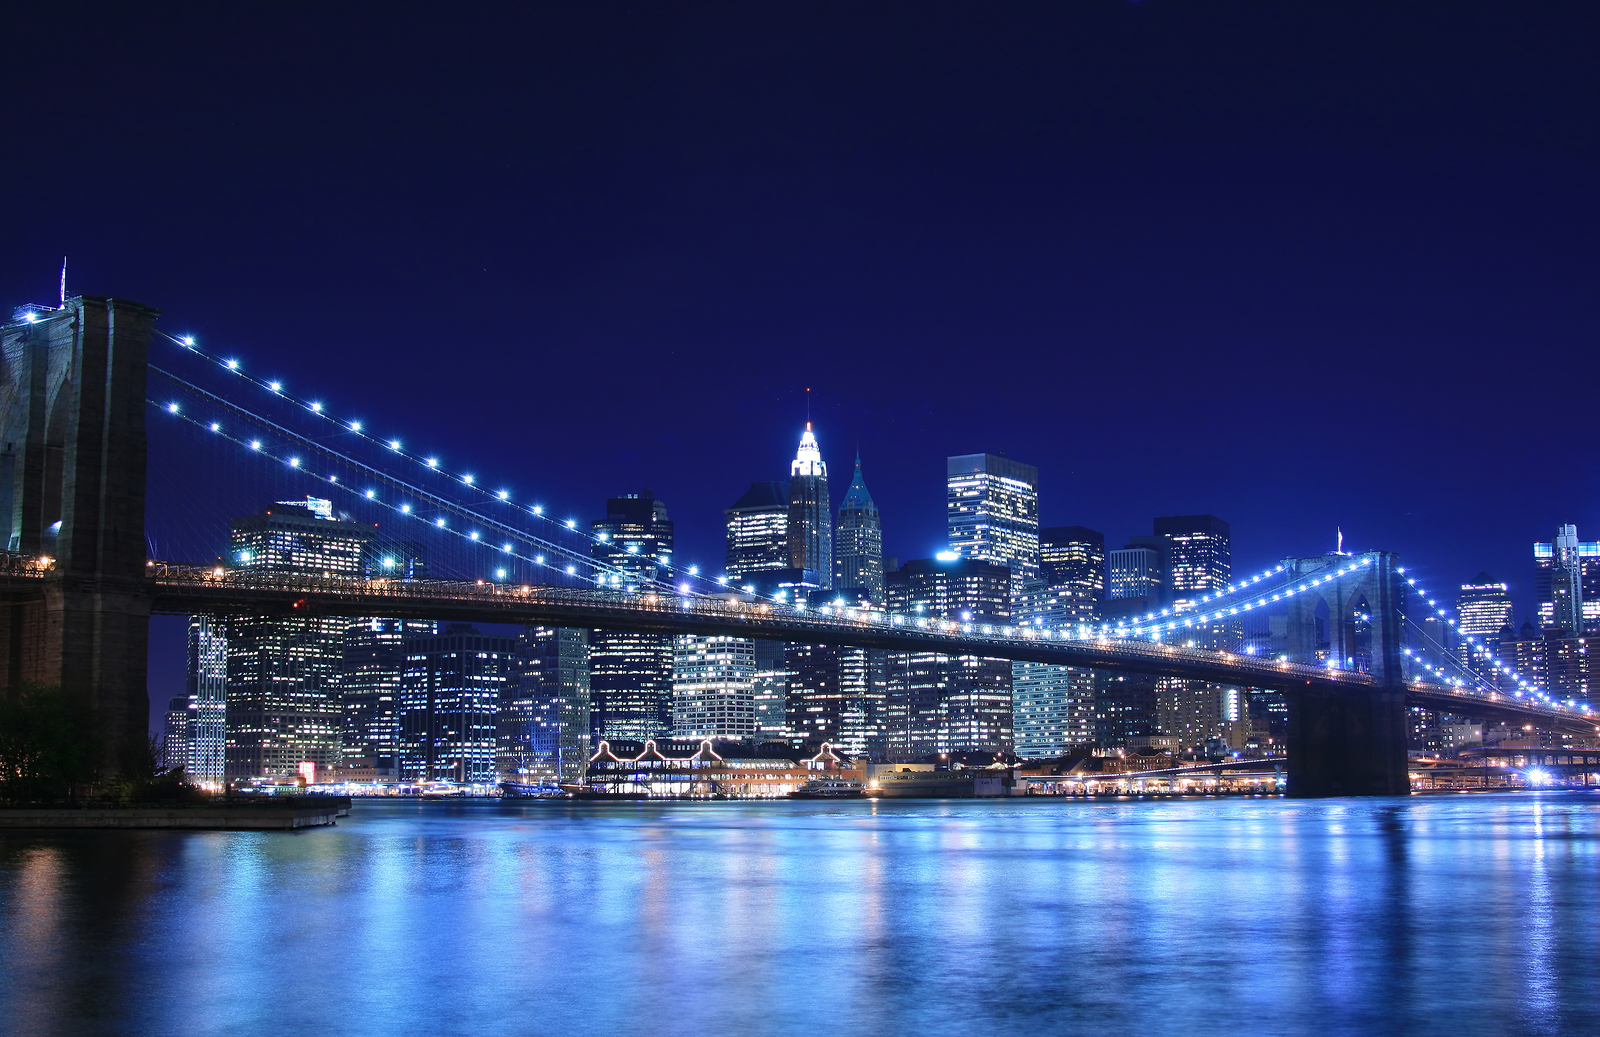 Where can I study at night in NYC? - Foodly